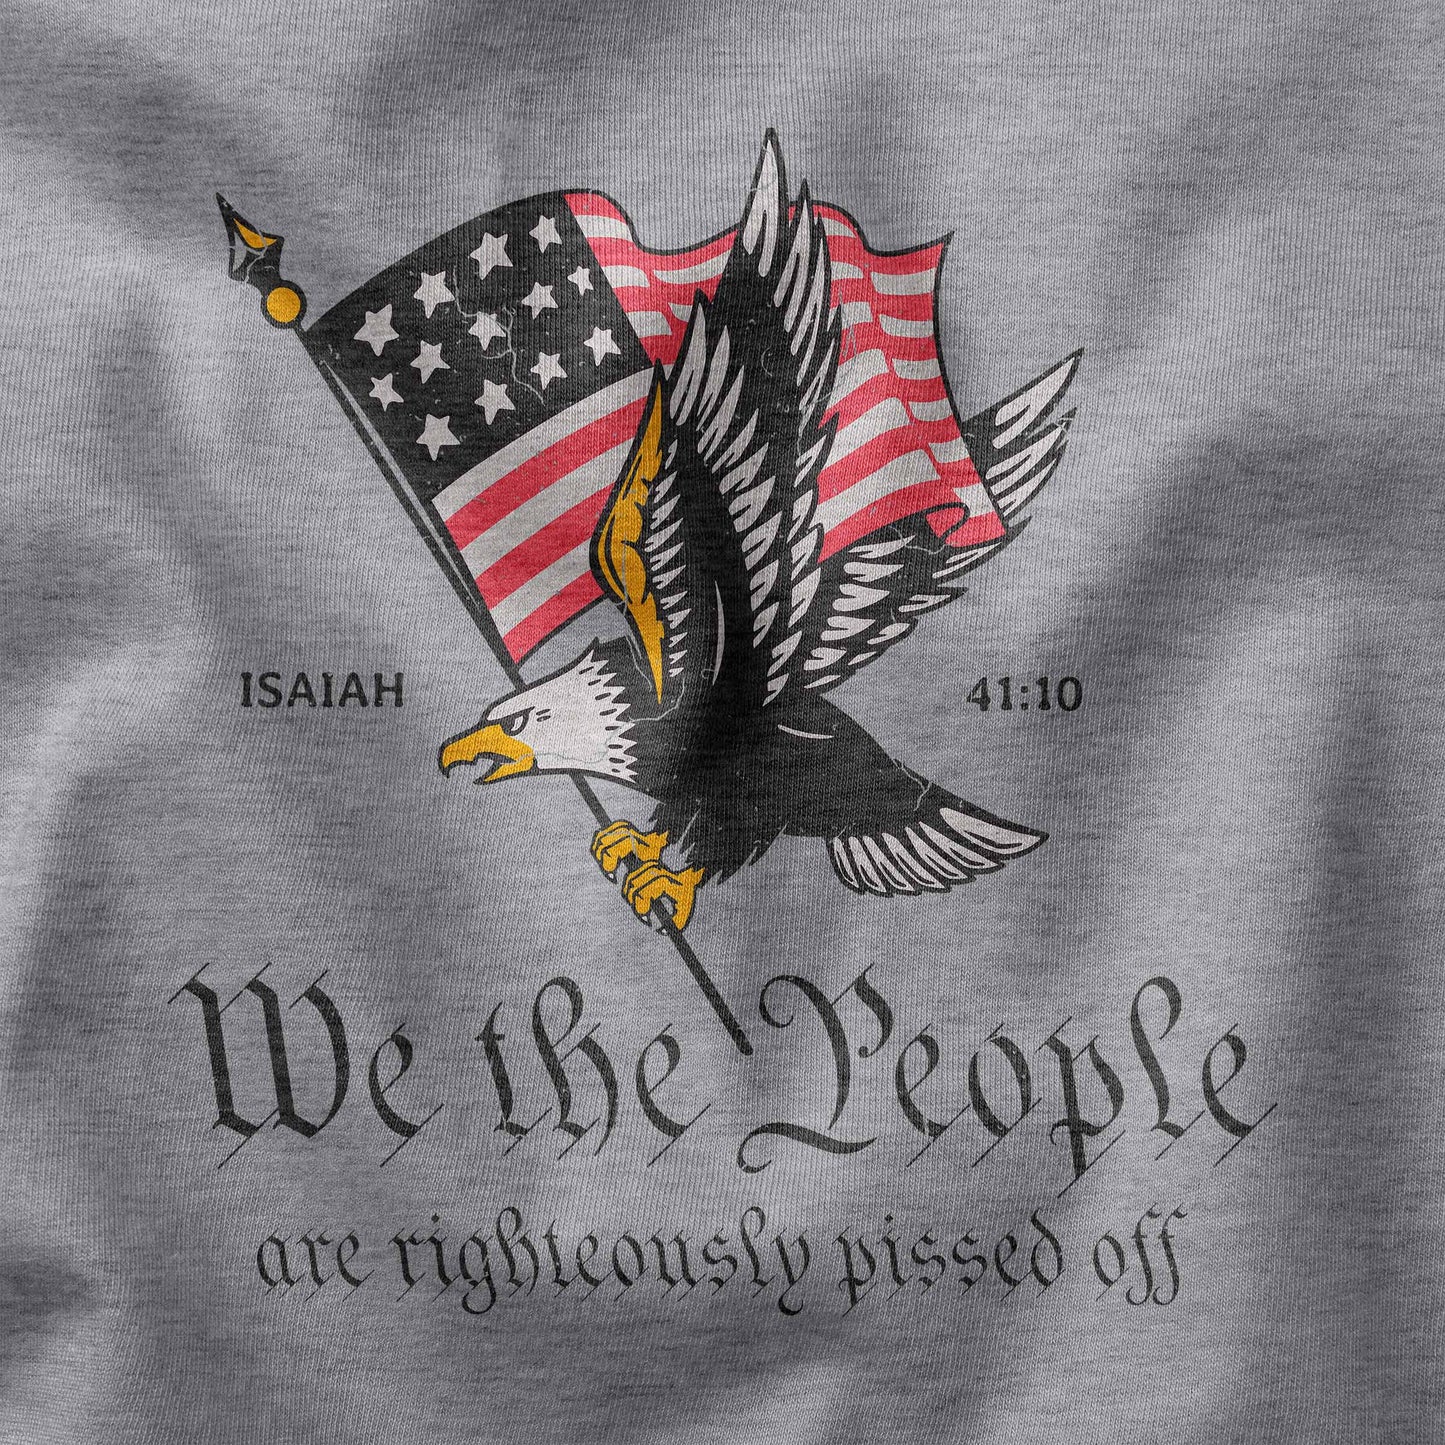 Closeup of design on Christian patriot shirt We the People are righteously pissed off